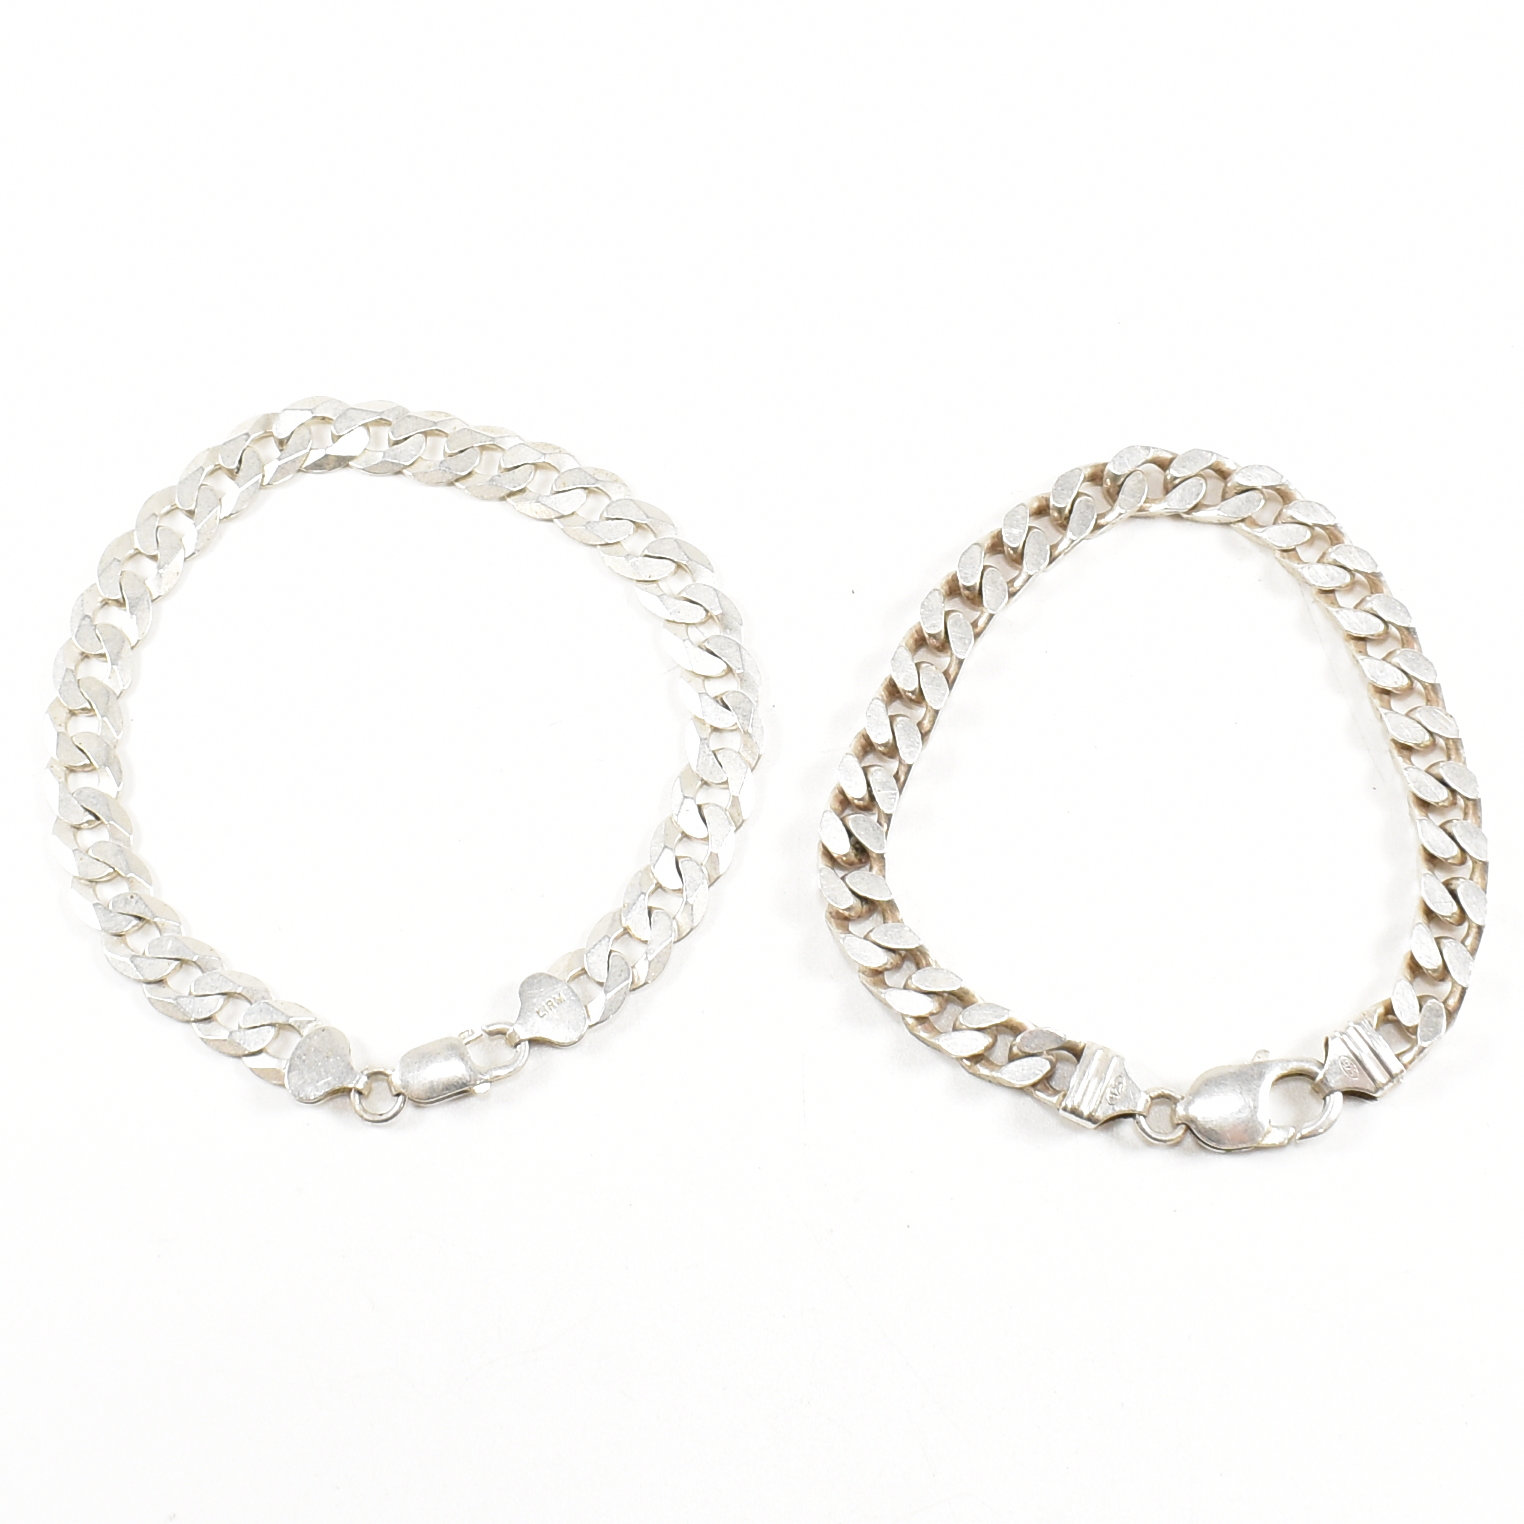 TWO CONTEMPORARY 925 SILVER CUBAN LINK BRACELETS - Image 3 of 7